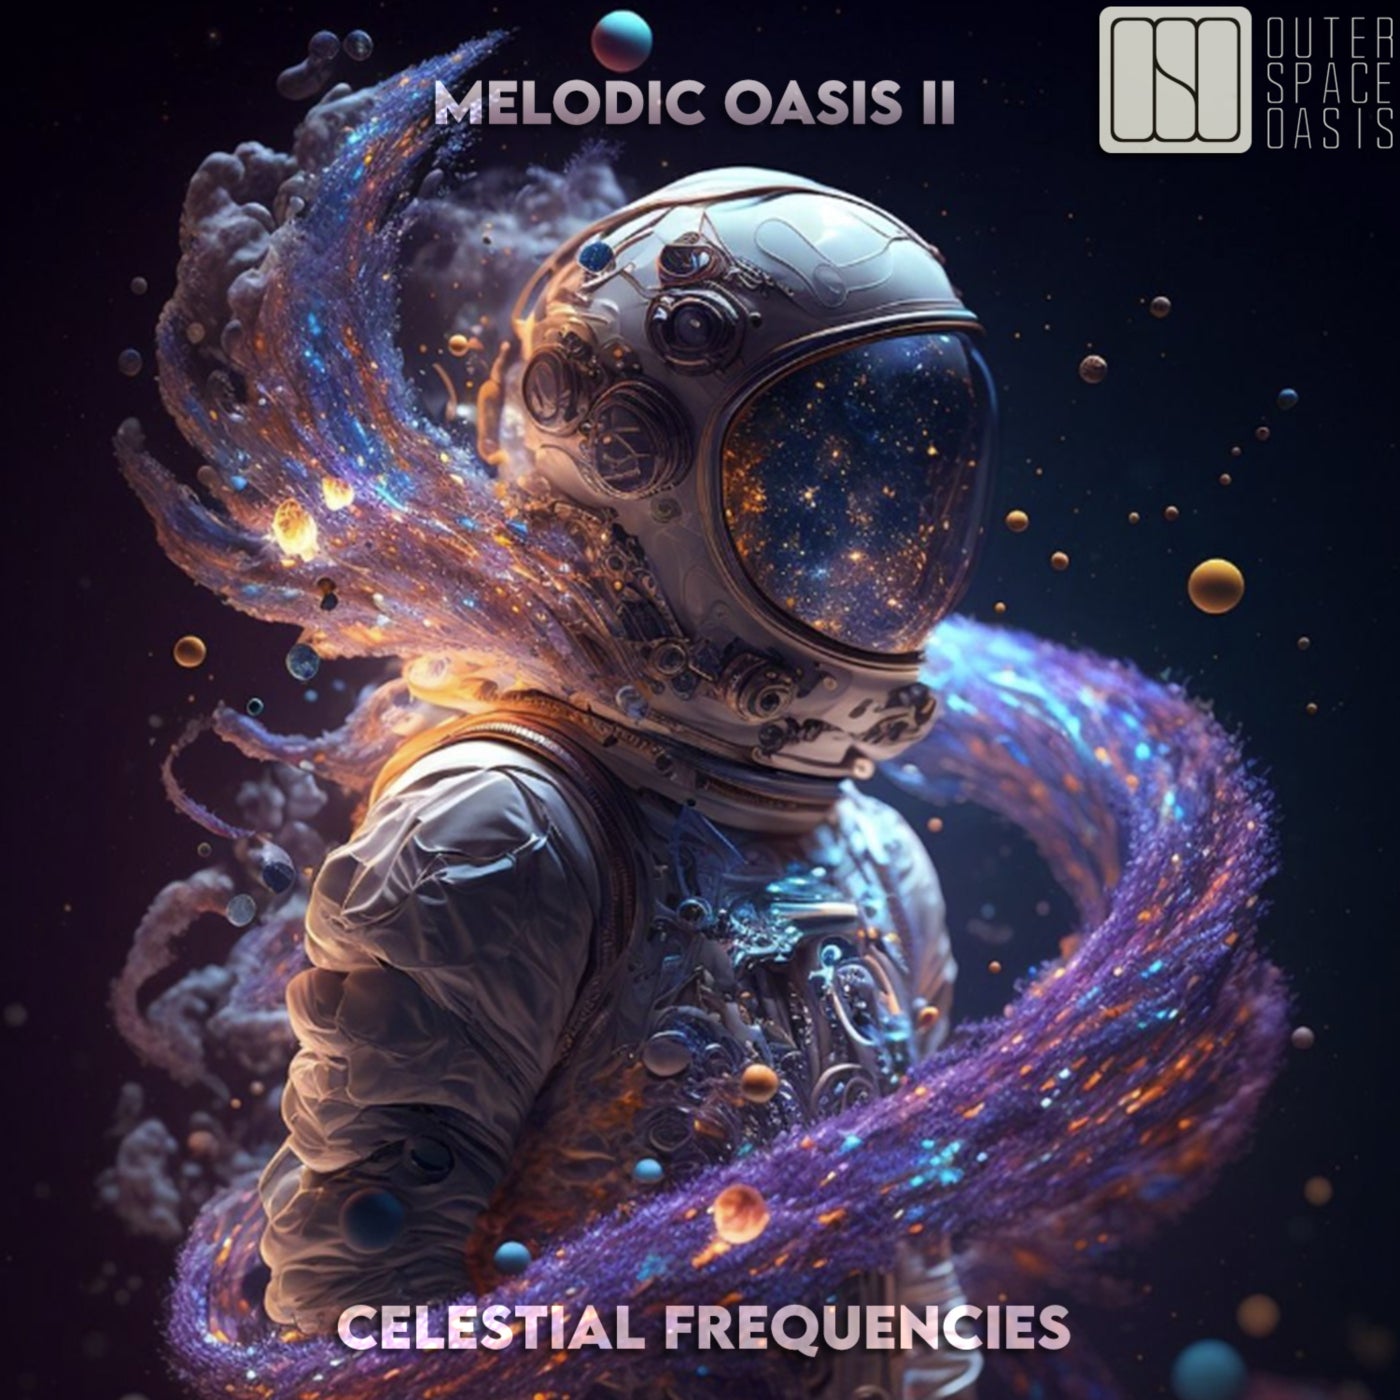 Melodic Oasis II - Celestial Frequencies